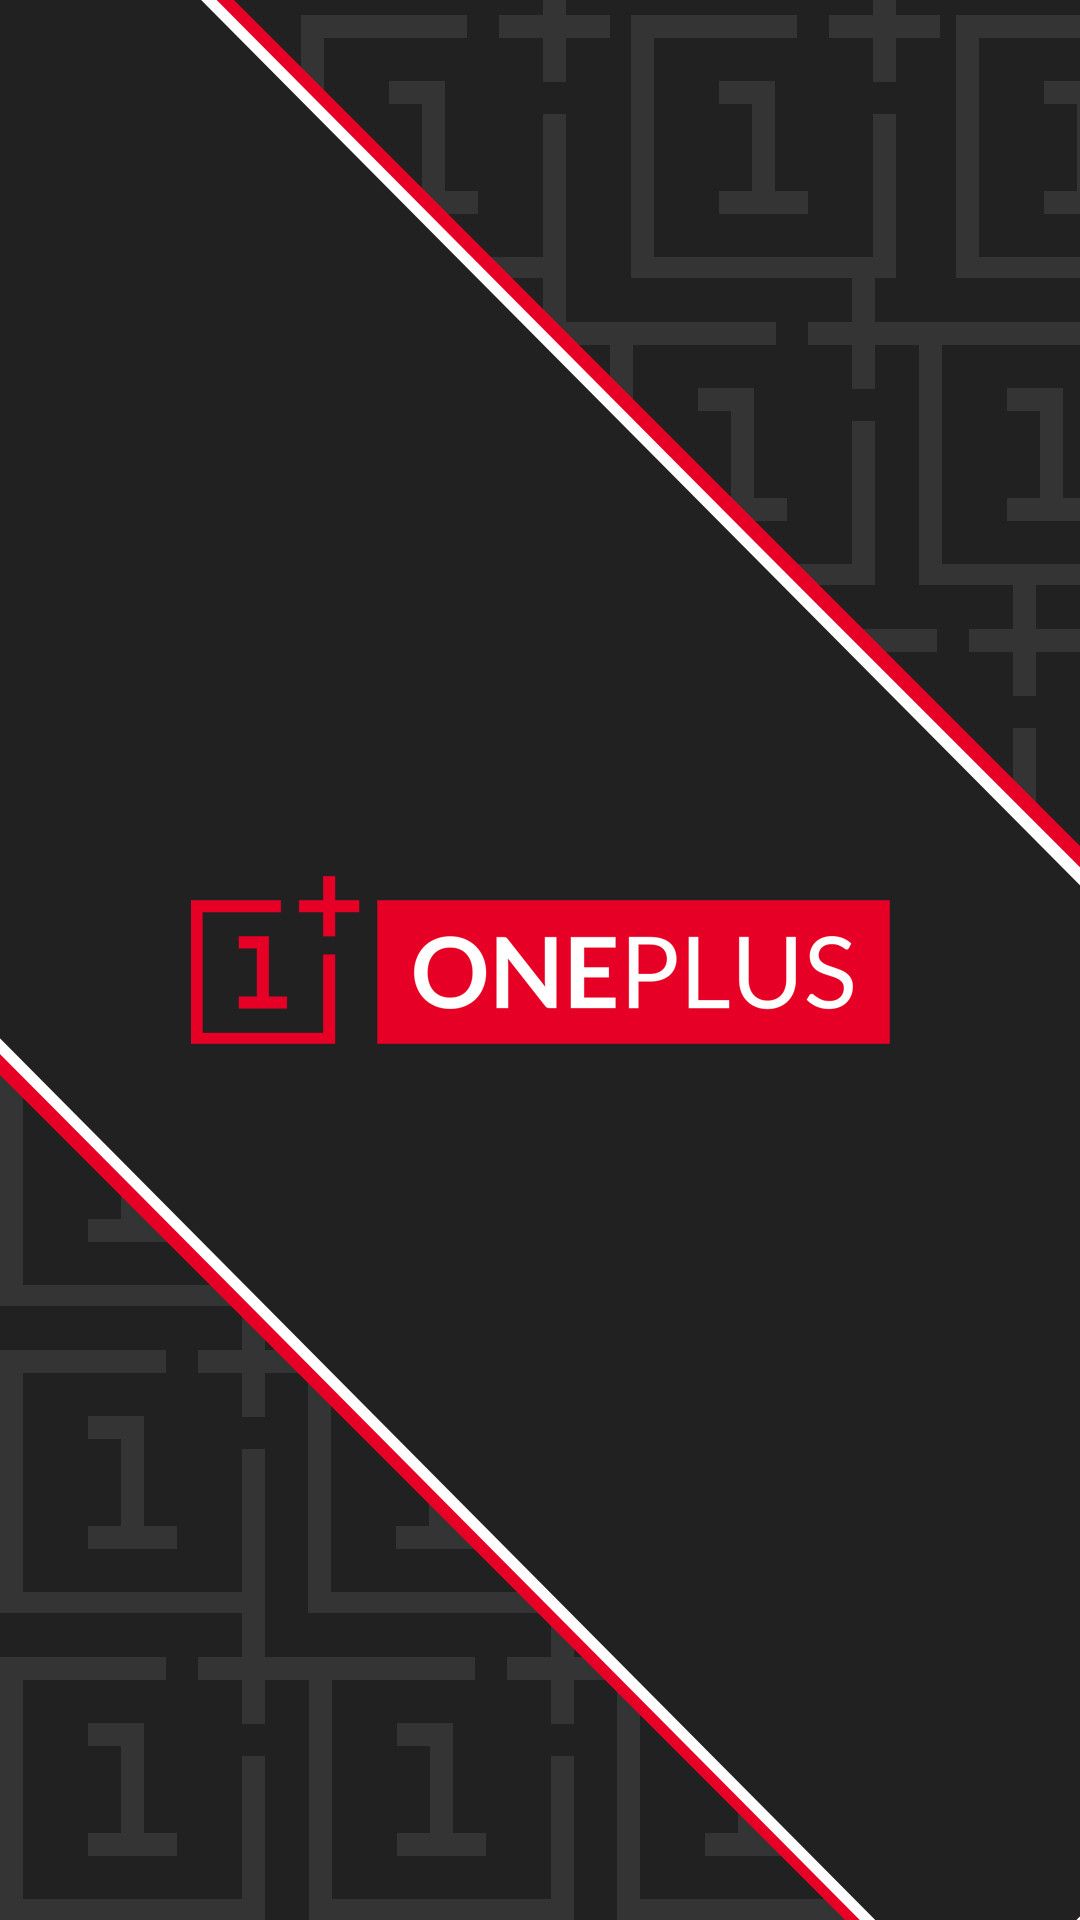 Download wallpapers OnePlus logo, silver shiny logo, OnePlus metal emblem,  wallpaper for OnePlus smartphones, gray carbon fiber texture, OnePlus,  brands, creative art for desktop with resolution 2560x1600. High Quality HD  pictures wallpapers